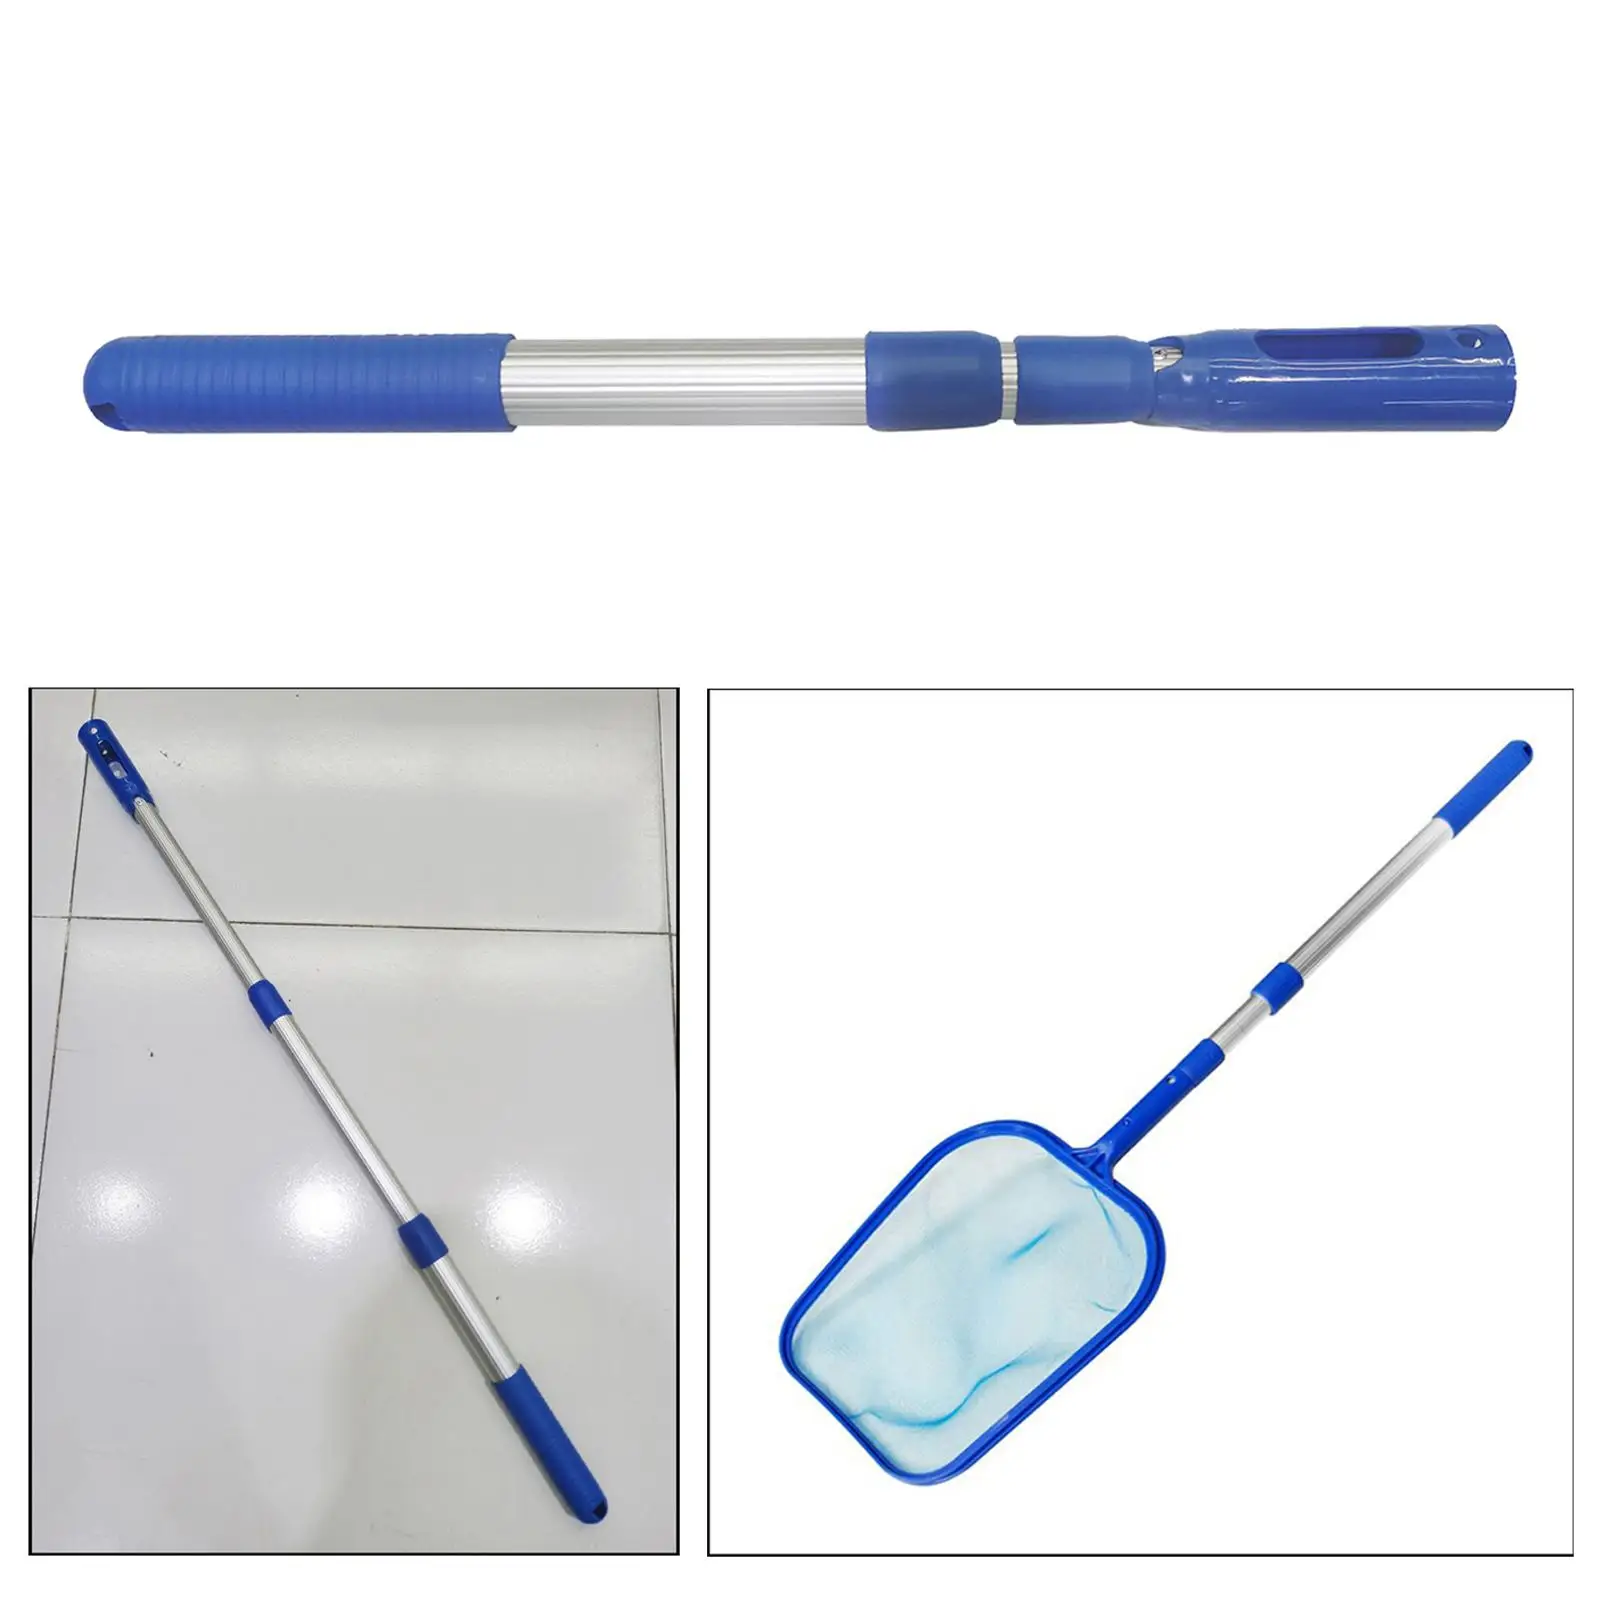 3-Stage Aluminum Spa Swimming Pool Extendable Pole for Leaf Net Durable